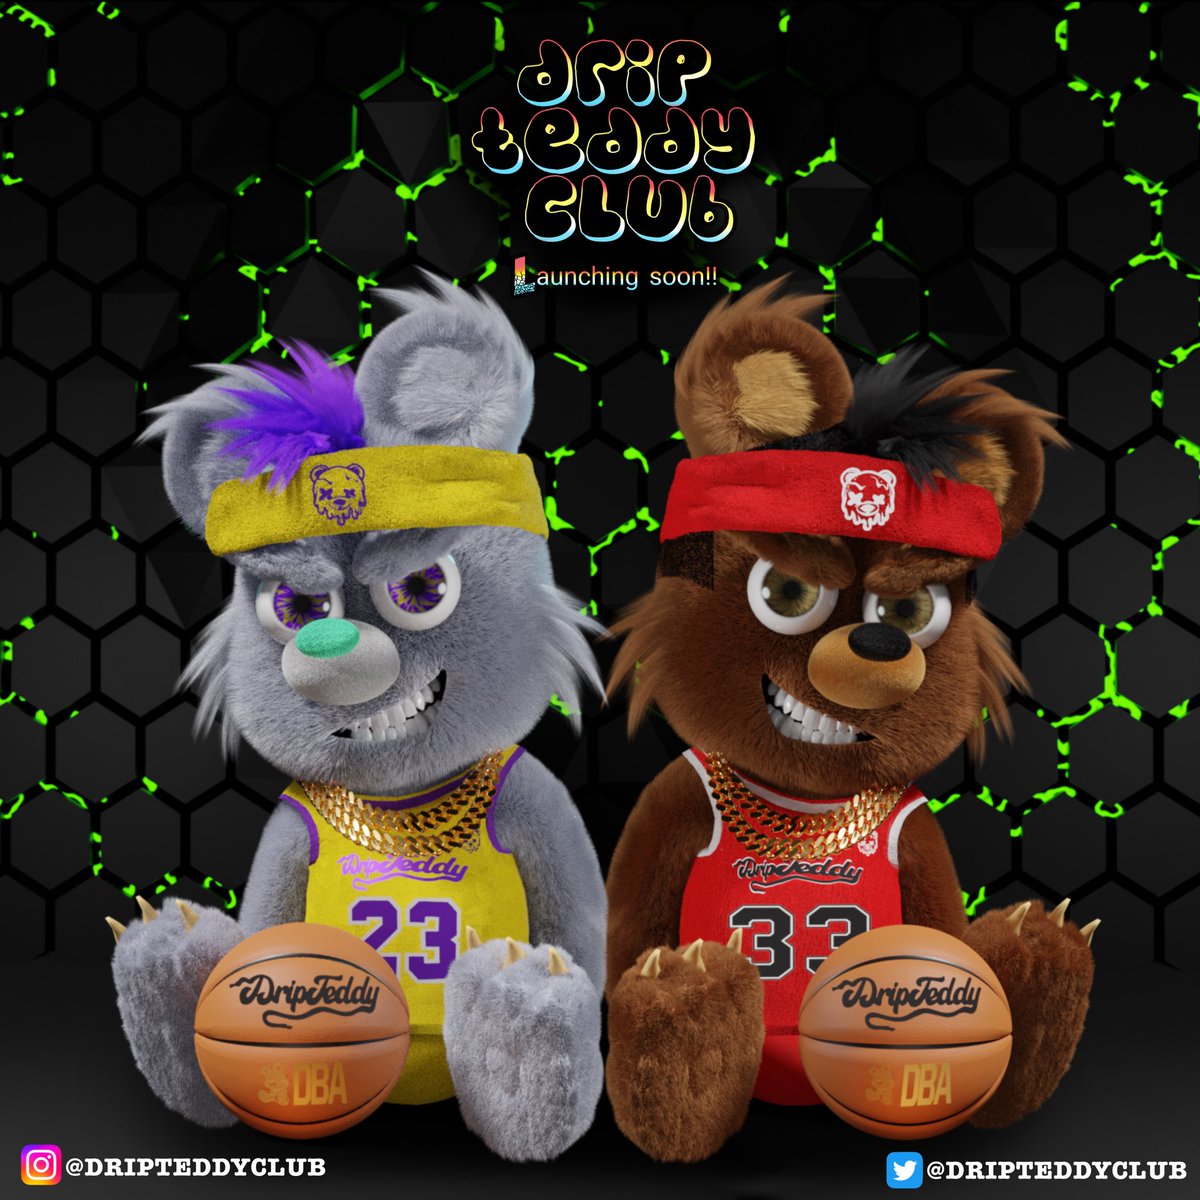 @ScottiePippen You wanted to know about other projects?? Checkout @Dripteddyclub !! I think you’ll like the bear on the right!! He reminds me of a legend I know. 😉👌